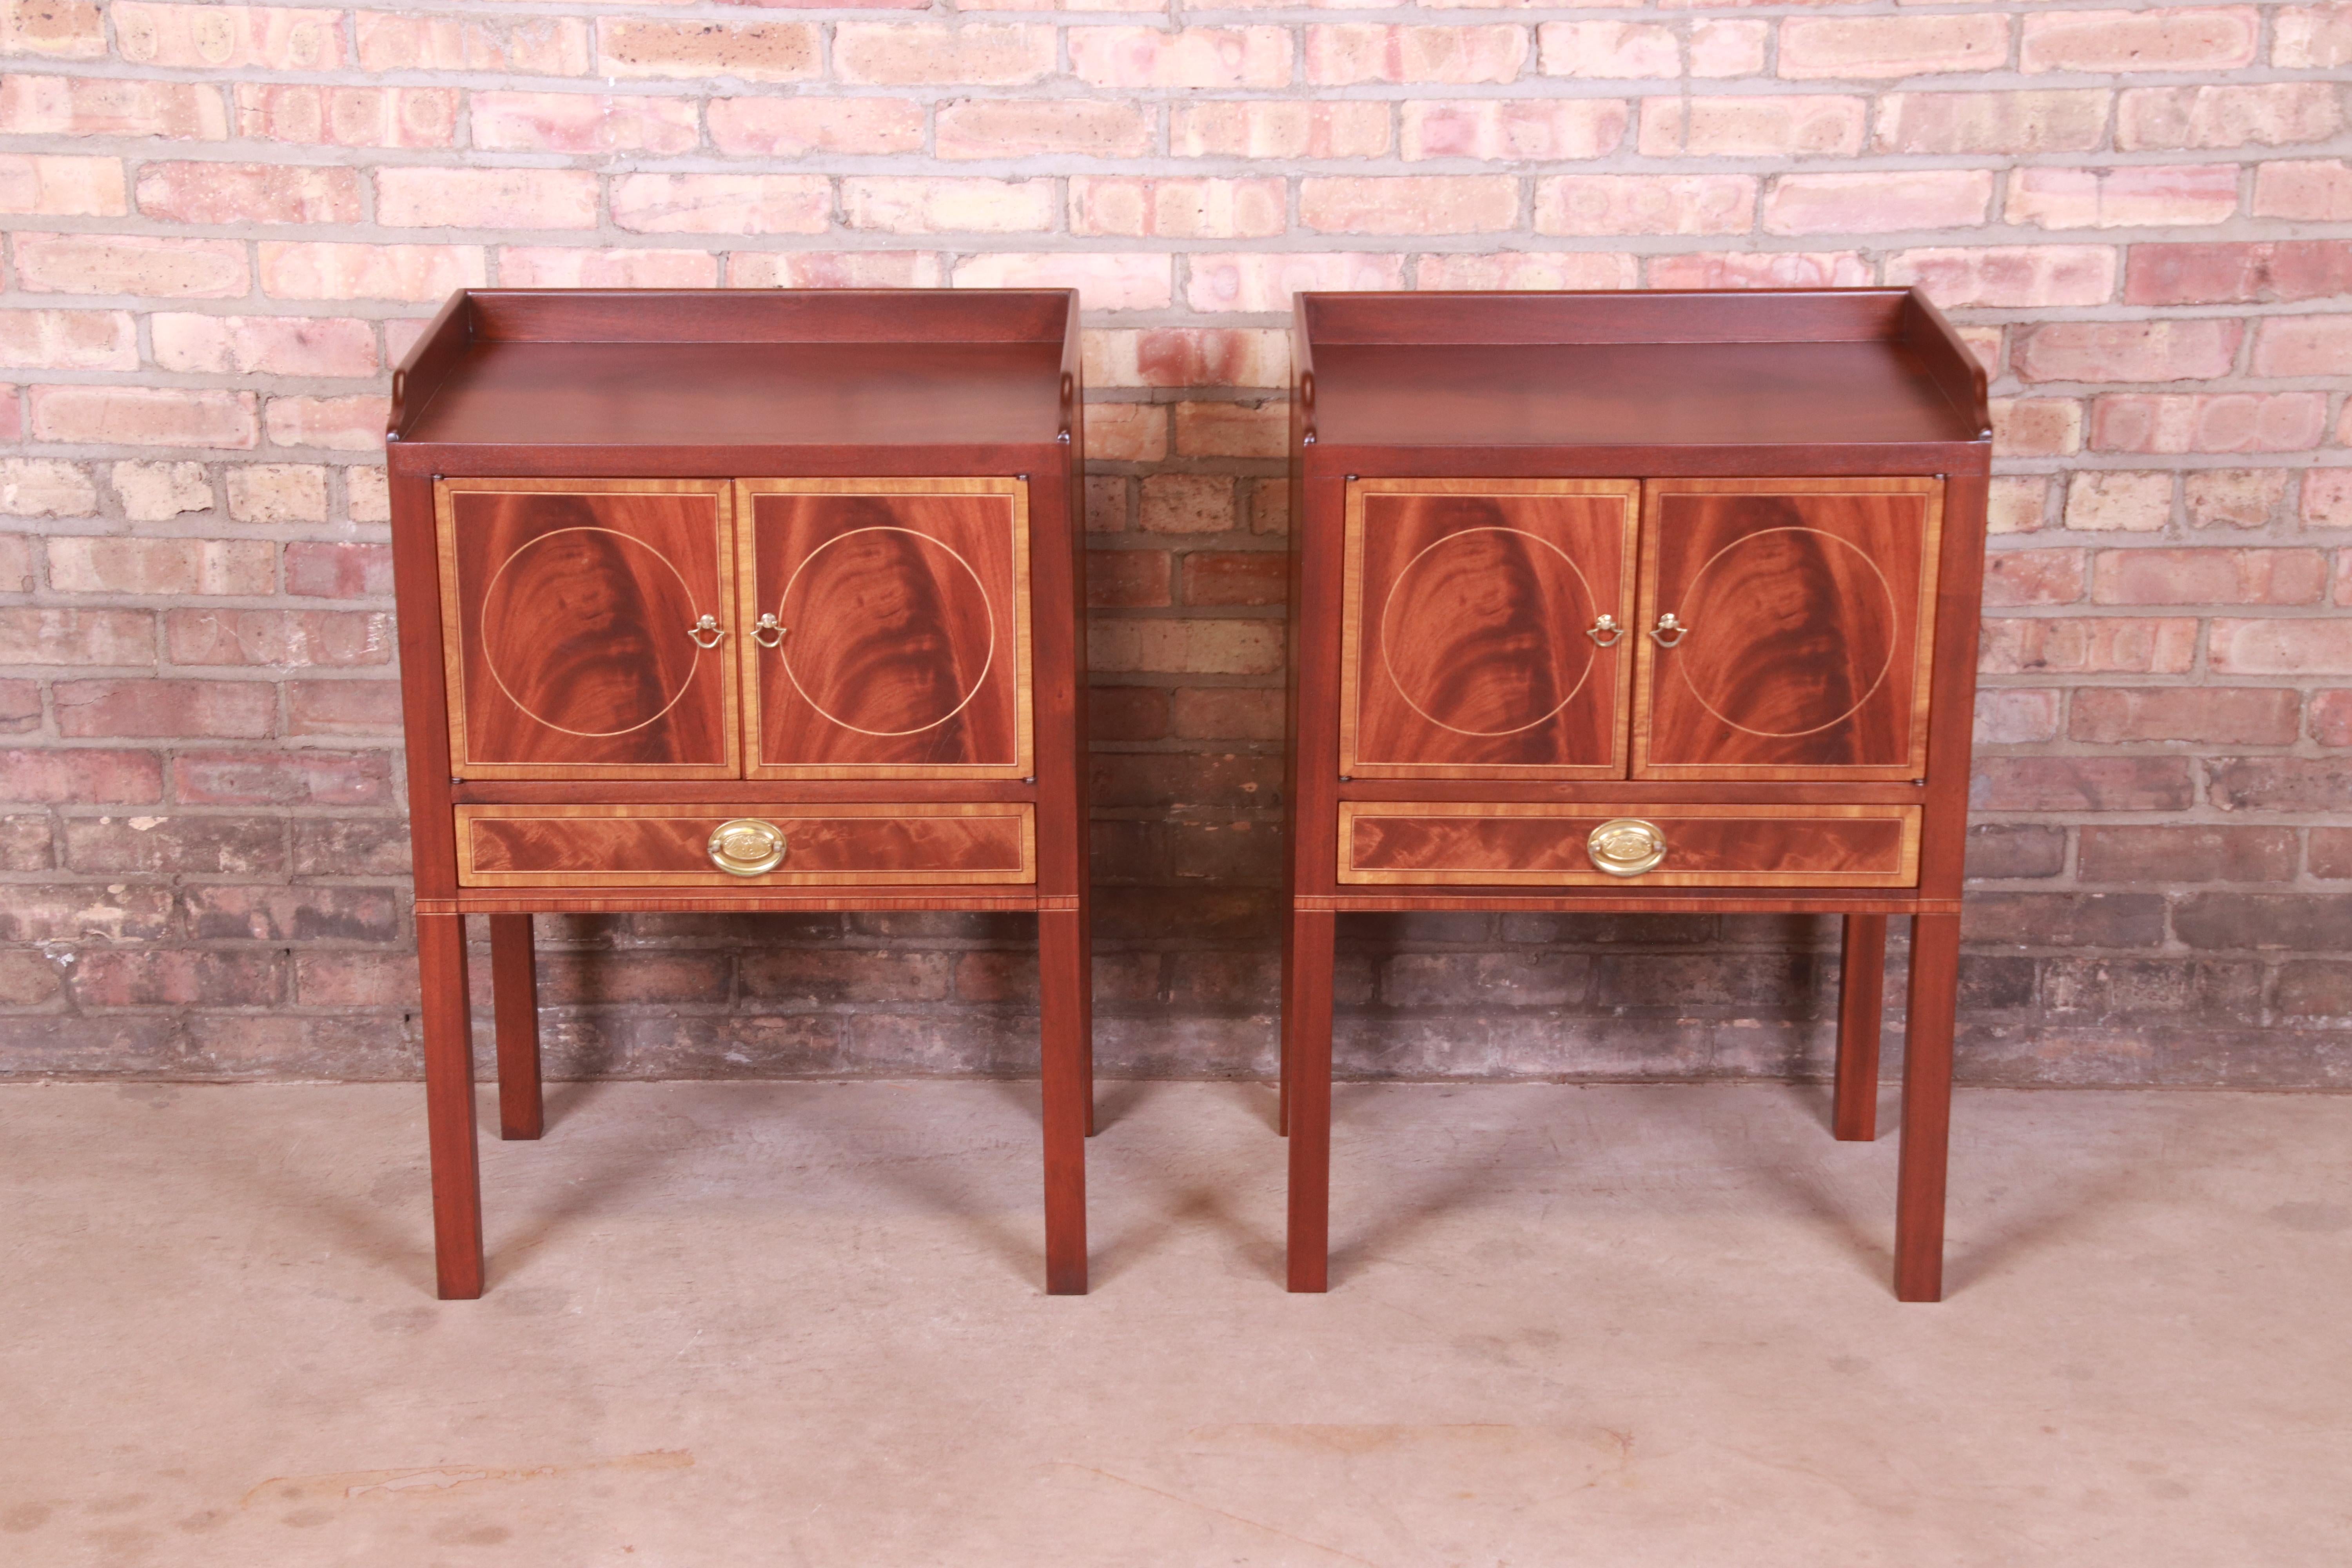 A gorgeous pair of Georgian or Federal style bedside tables

By Baker Furniture, 